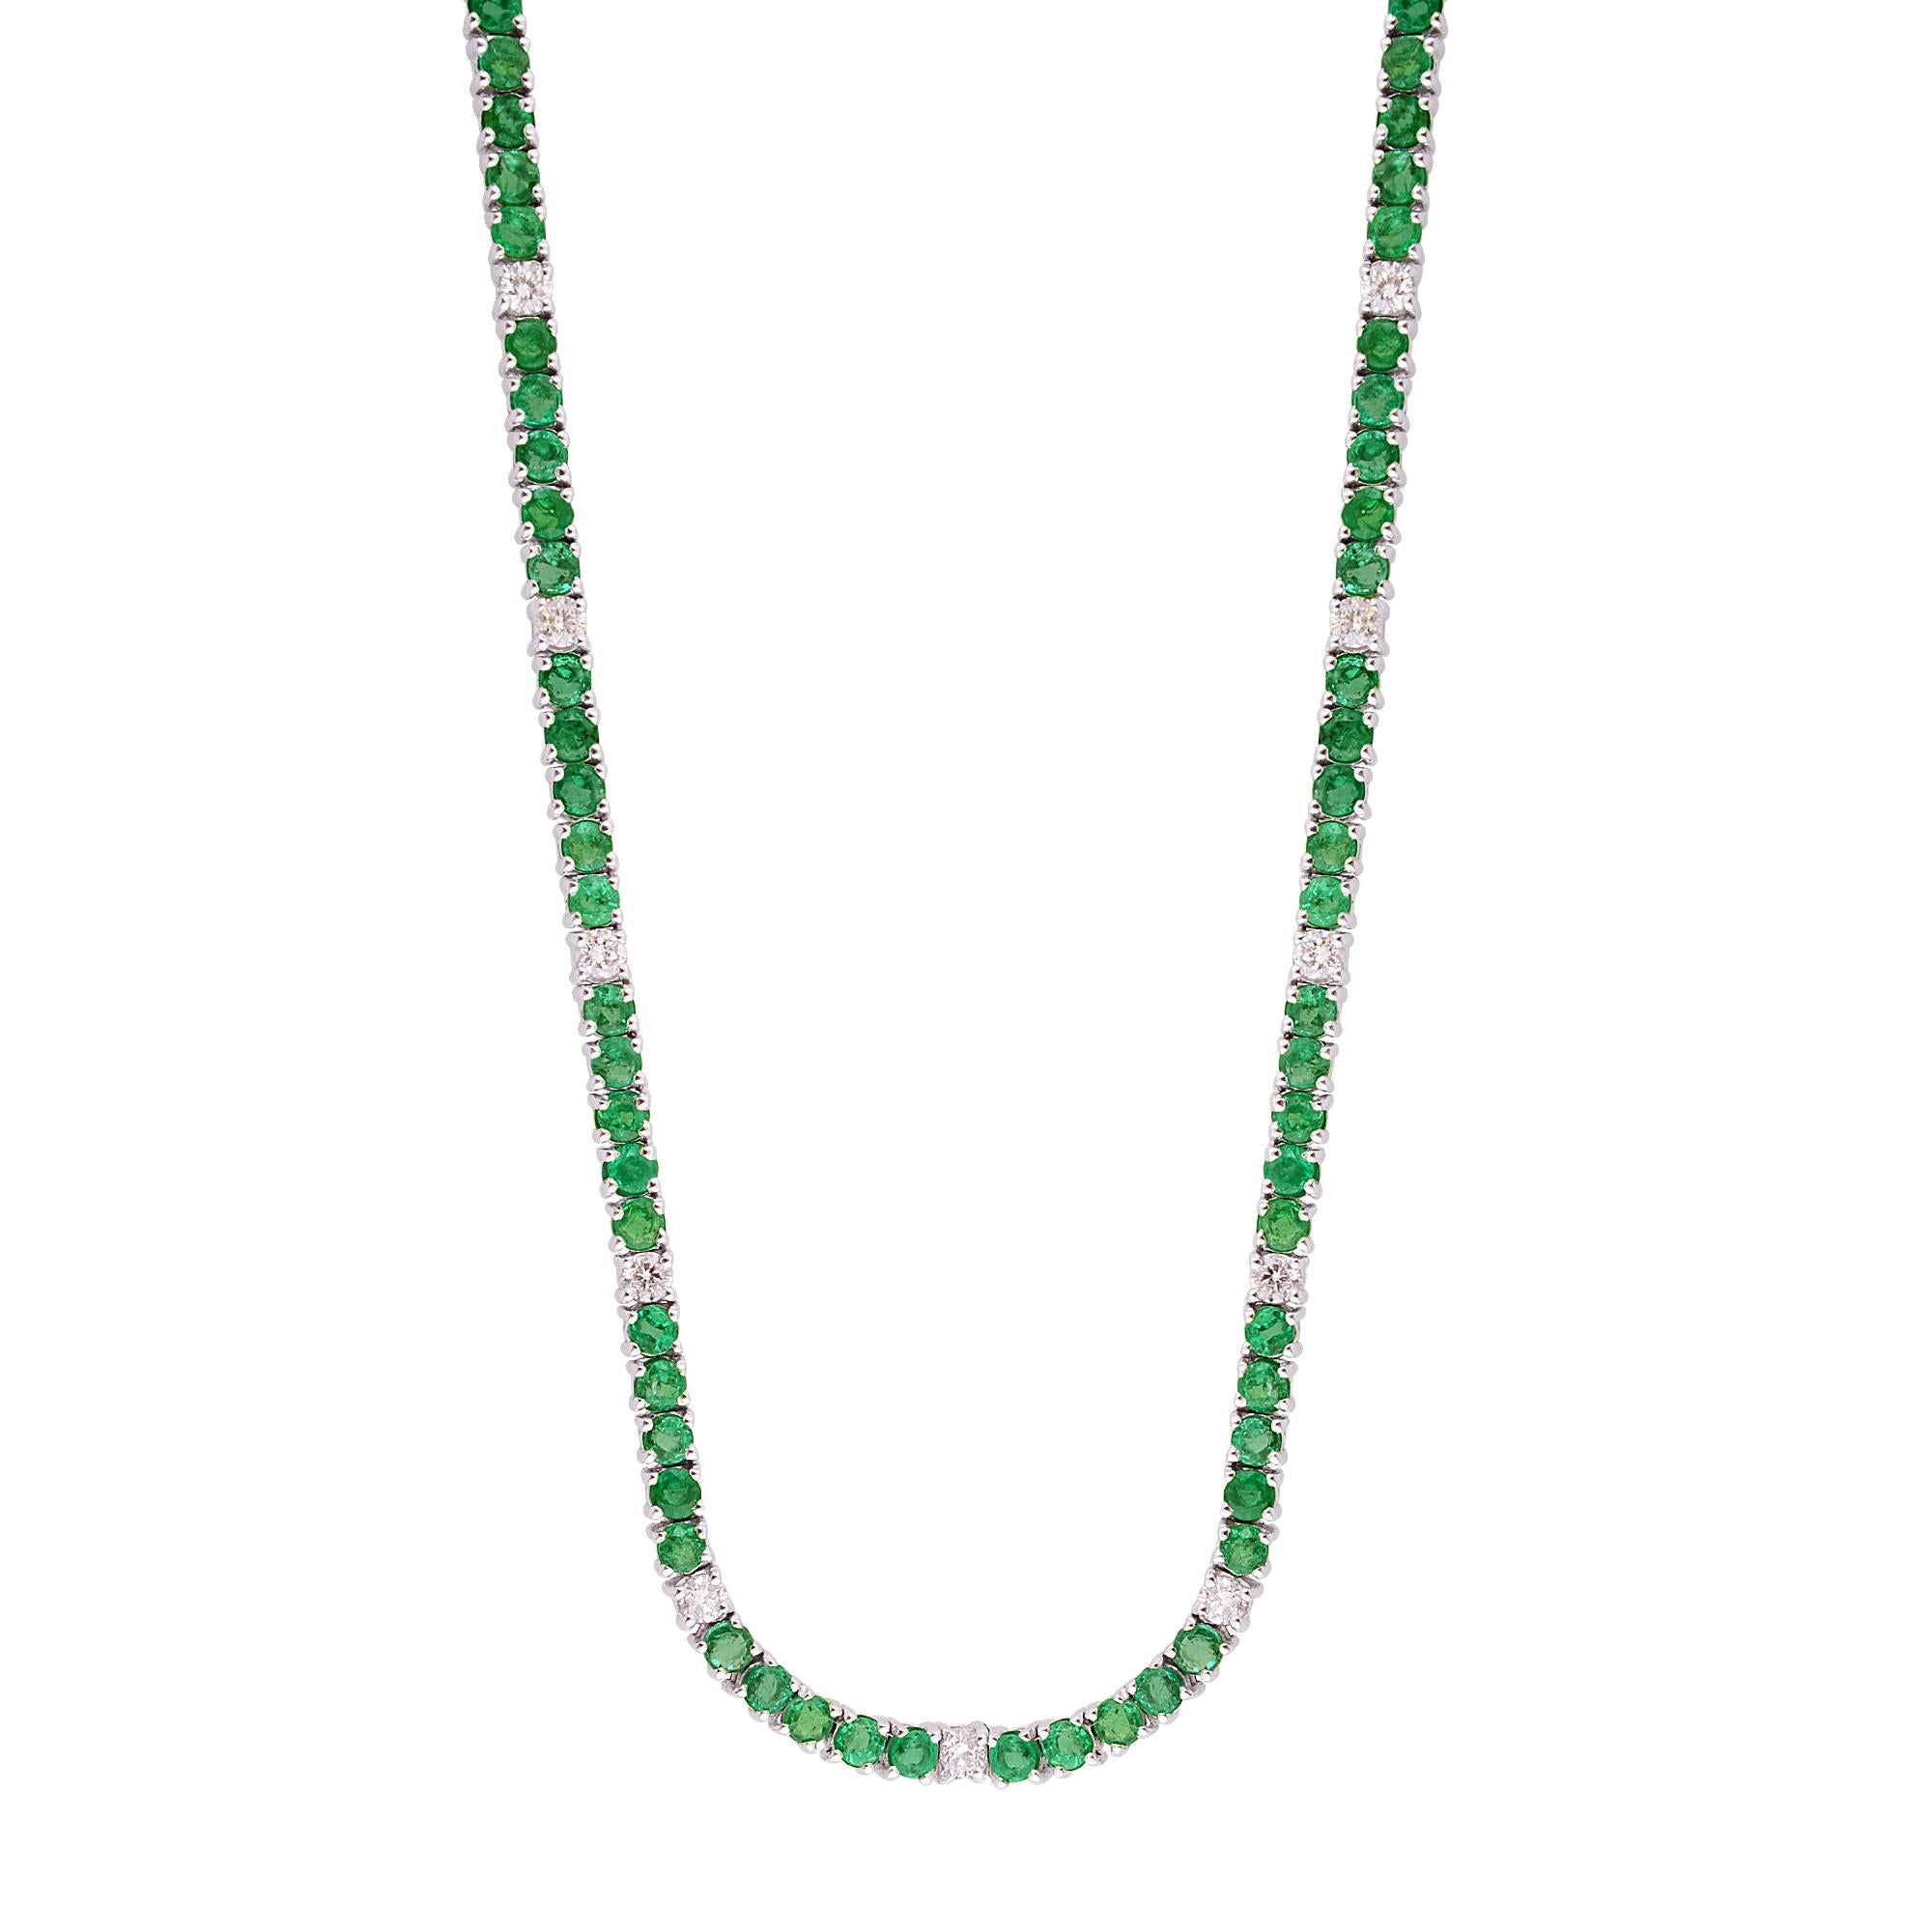 Surrounding the emerald are sparkling round-cut diamonds, meticulously set within the gleaming 10 Karat White Gold setting. These diamonds add a touch of glamour and sophistication to the necklace, enhancing the natural beauty of the emerald and